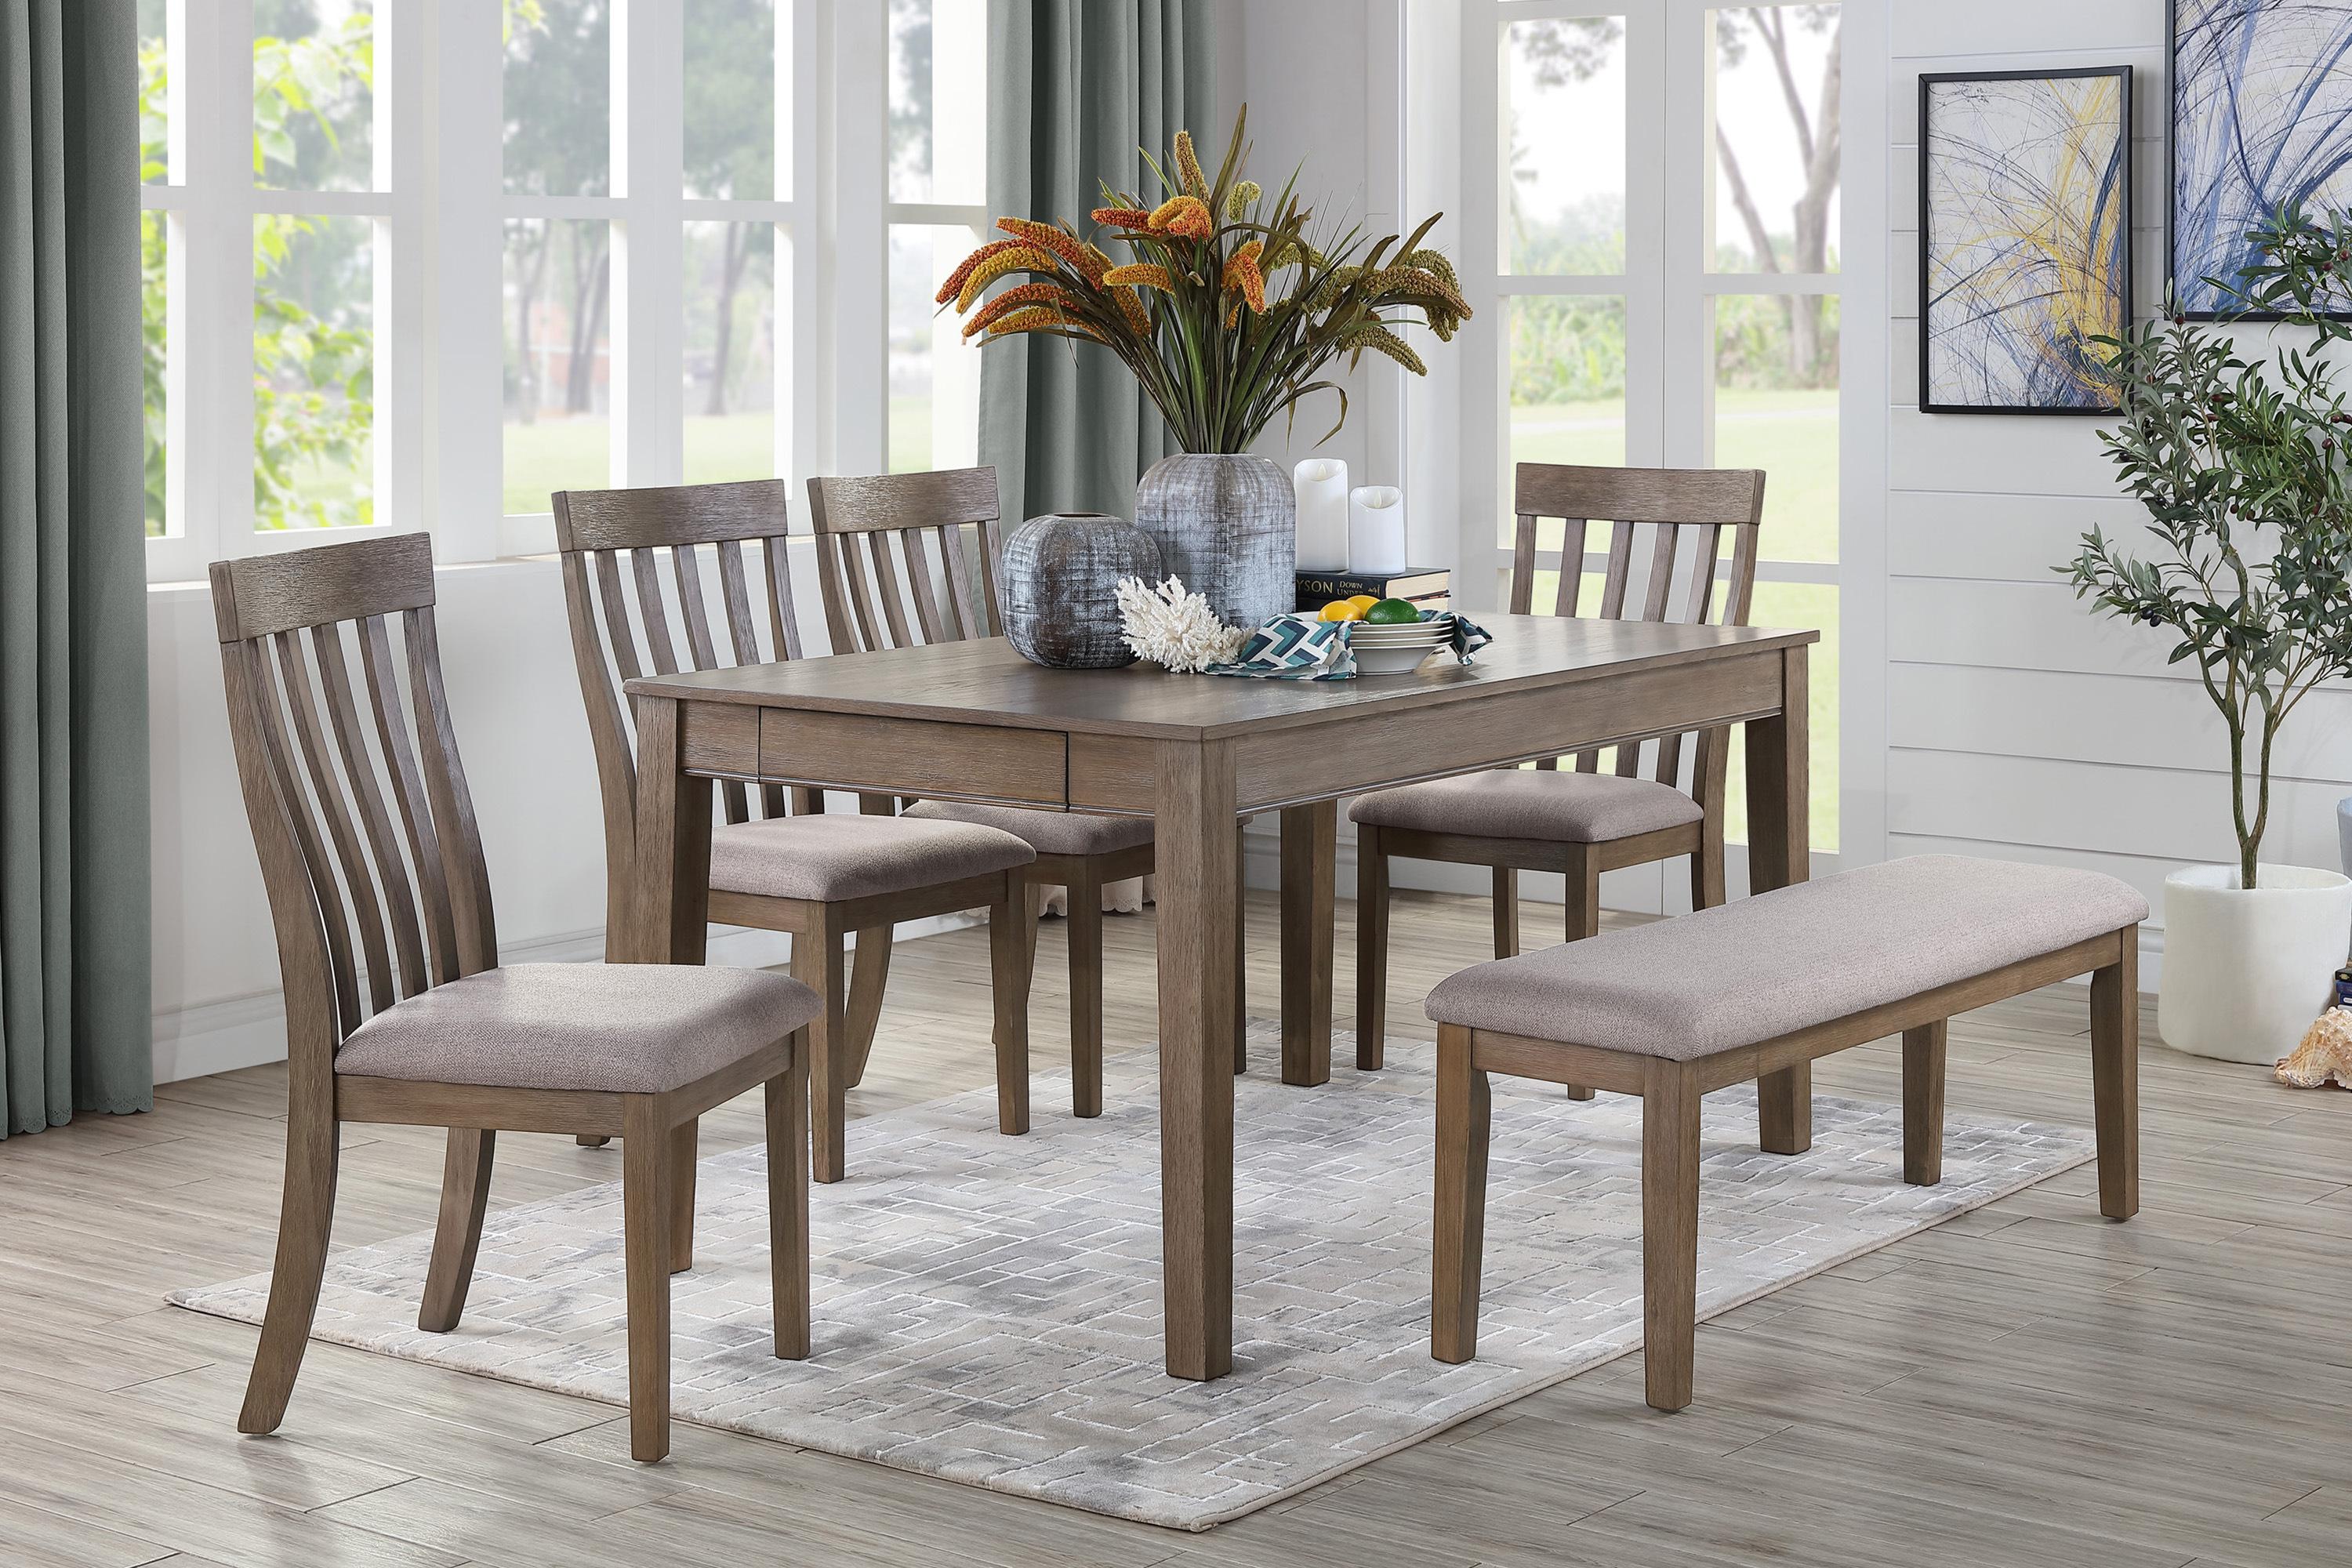 Transitional Dining Room Set 5706-60*6PC Armhurst 5706-60*6PC in Brown Polyester